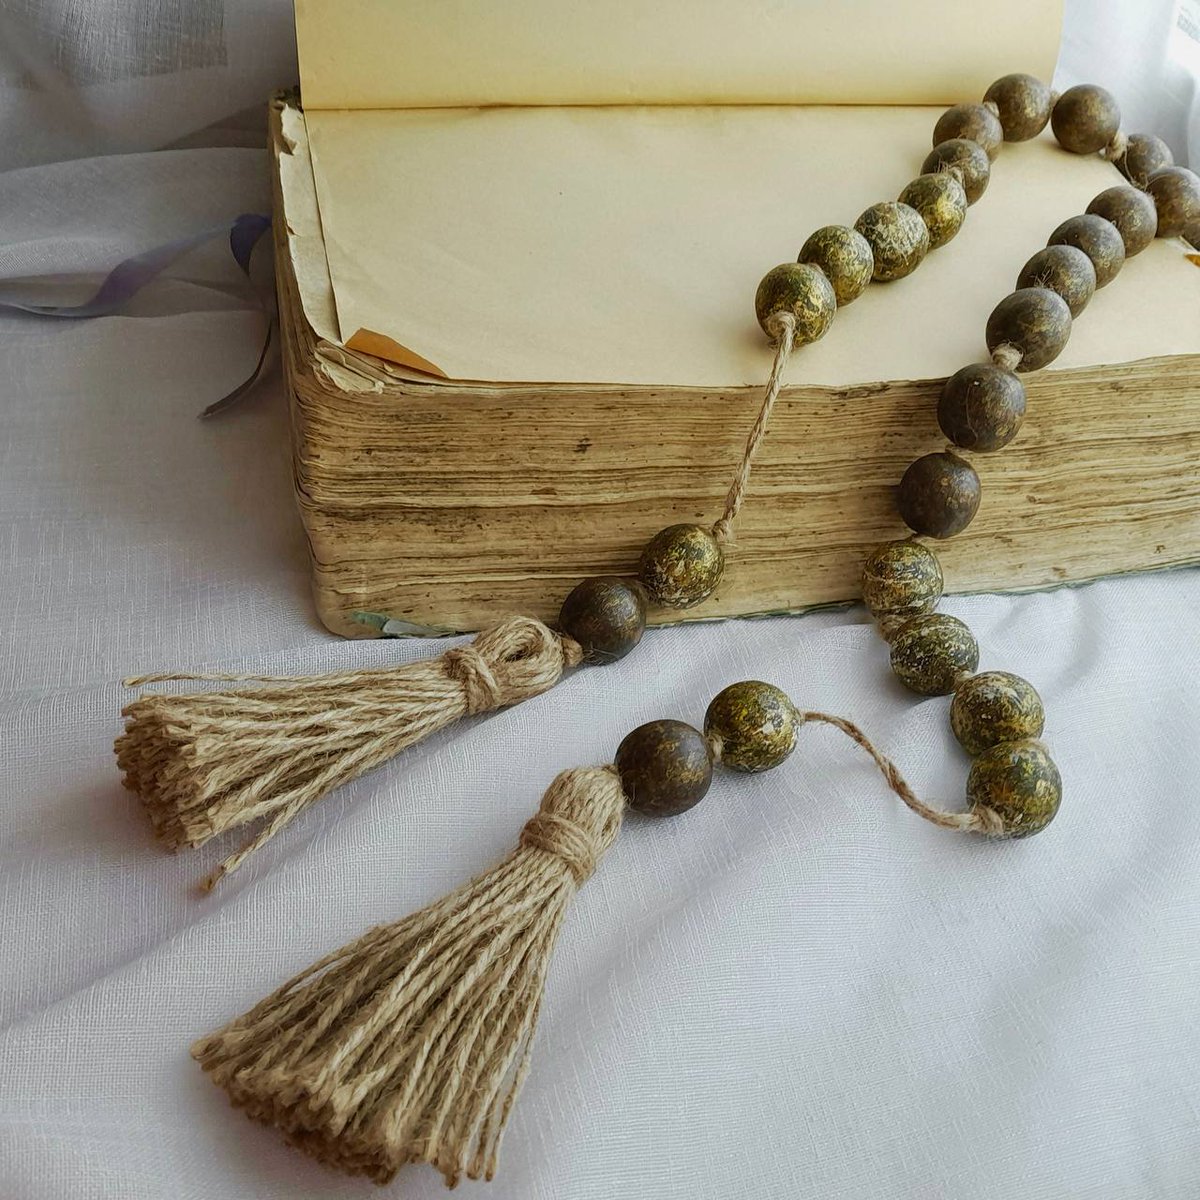 It's a perfect gift for housewarmings or birthdays, allowing your loved ones to reconnect with their spirituality. #giftideas #farmhousedecor #beads #woodenbeads #decoration #decor 
etsy.com/listing/155663…